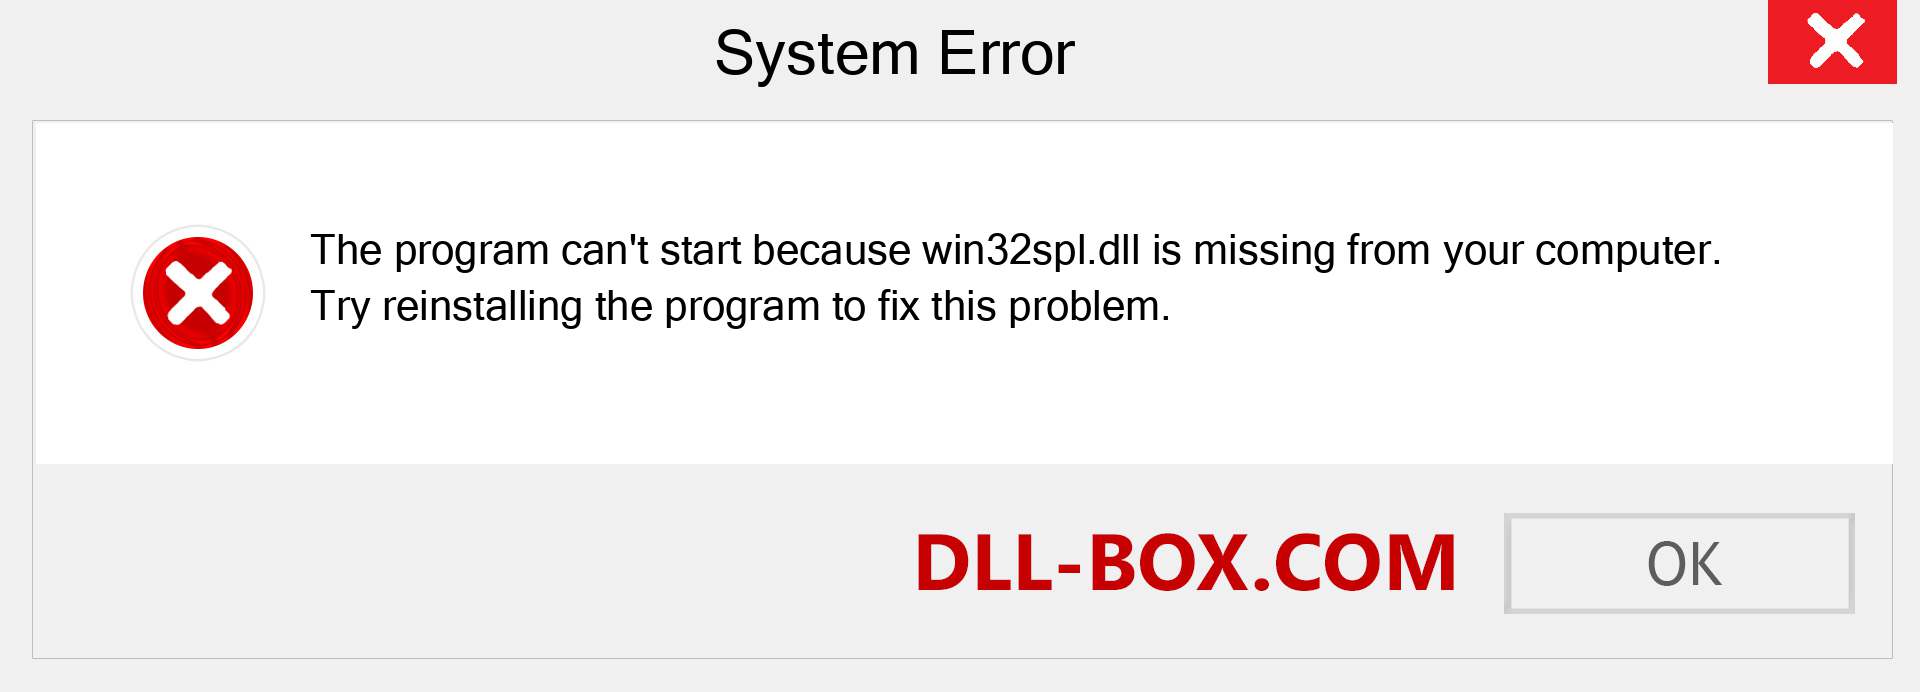  win32spl.dll file is missing?. Download for Windows 7, 8, 10 - Fix  win32spl dll Missing Error on Windows, photos, images